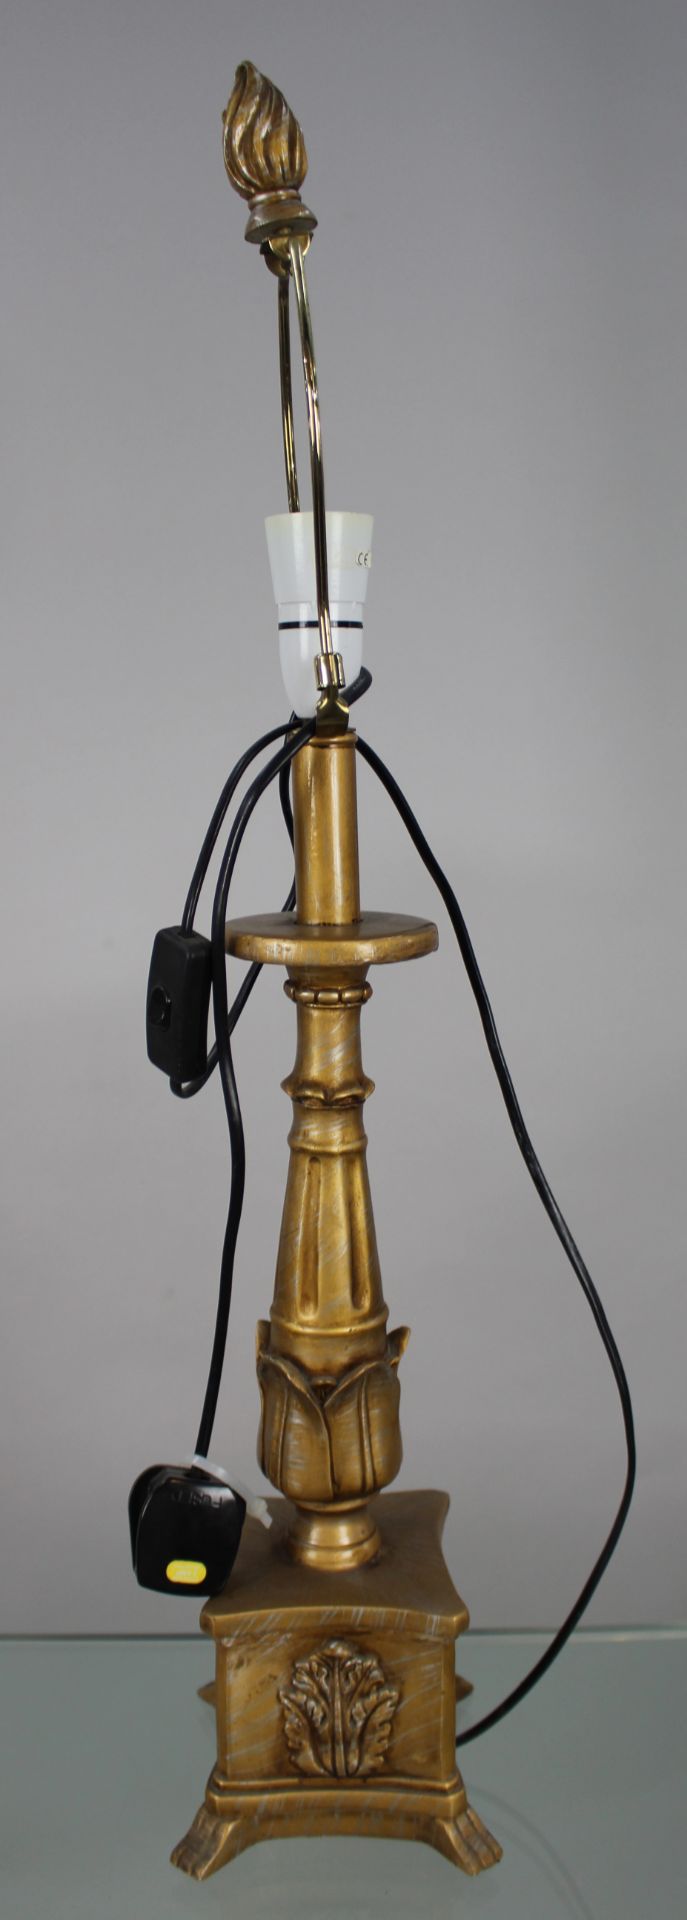 Collection of 6 Vintage Table Lamps - Image 16 of 17